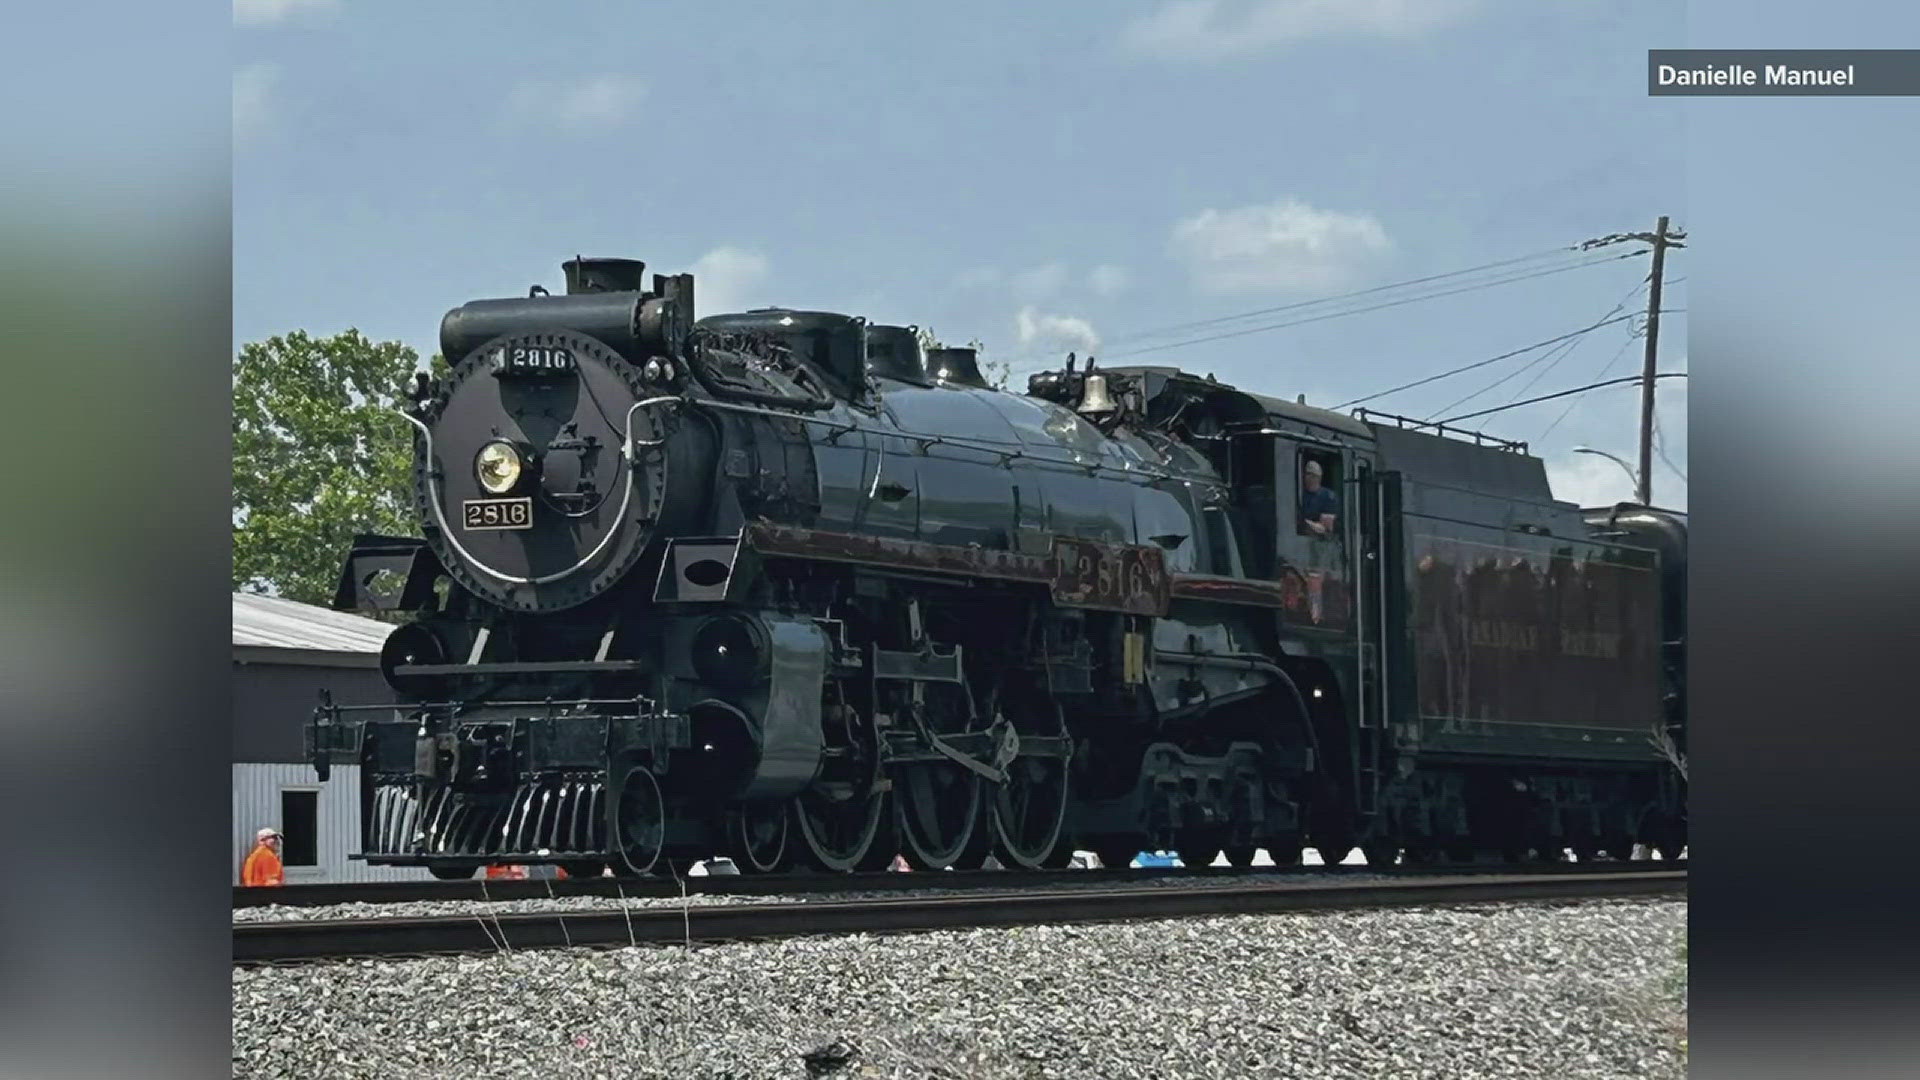 'The Empress' is a CP 2816 is a 4-6-4 Hudson type steam locomotive built in December 1930 by Montreal Locomotive Works.